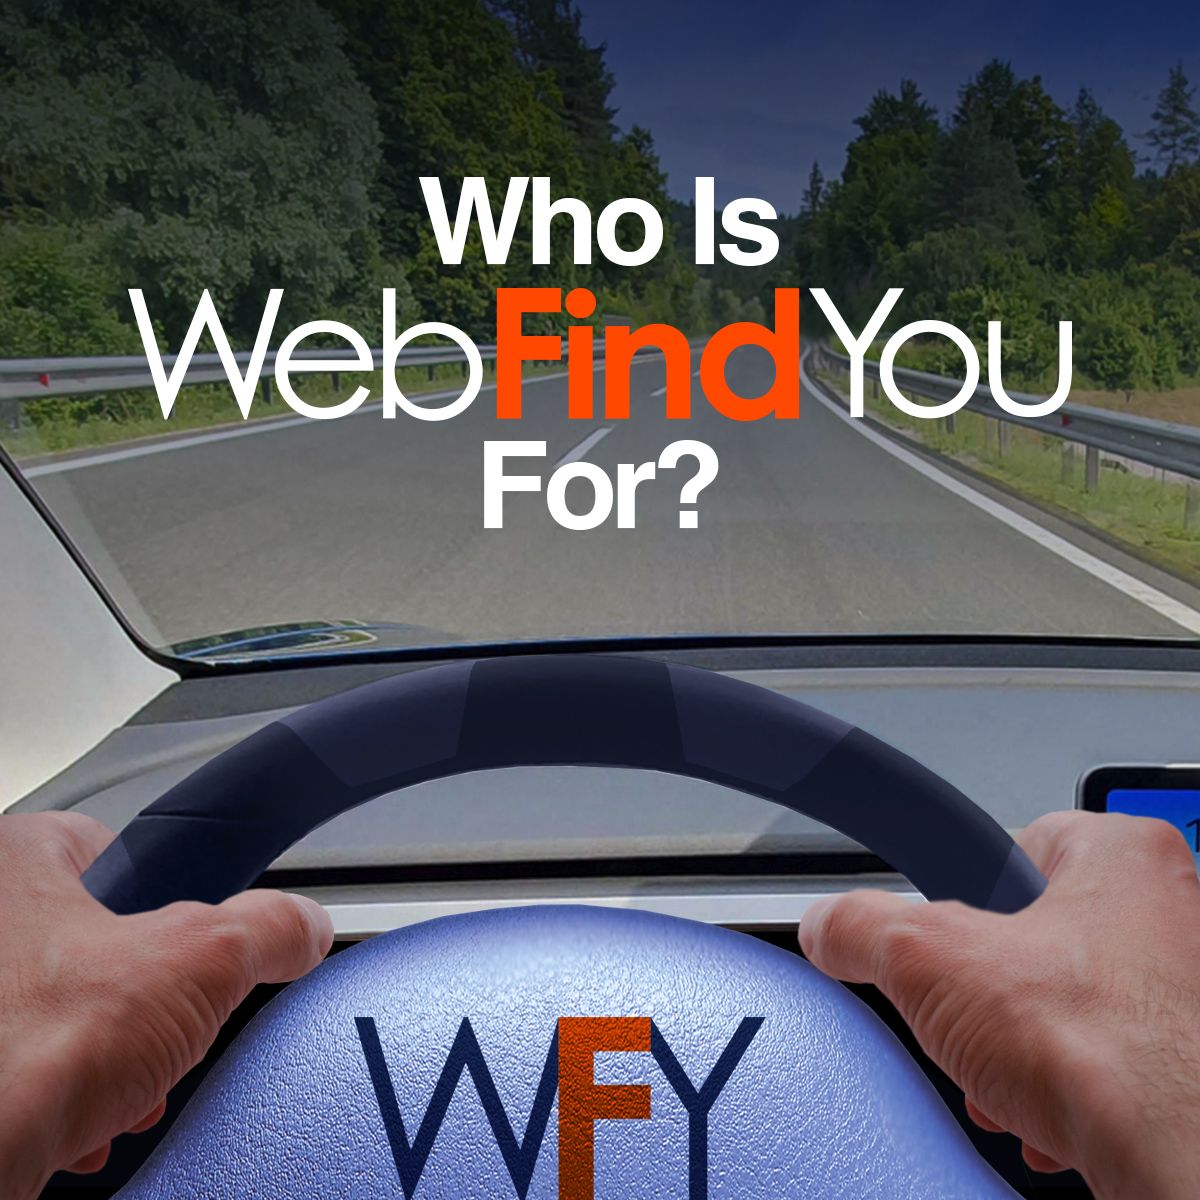 Who Is WebFindYou For?